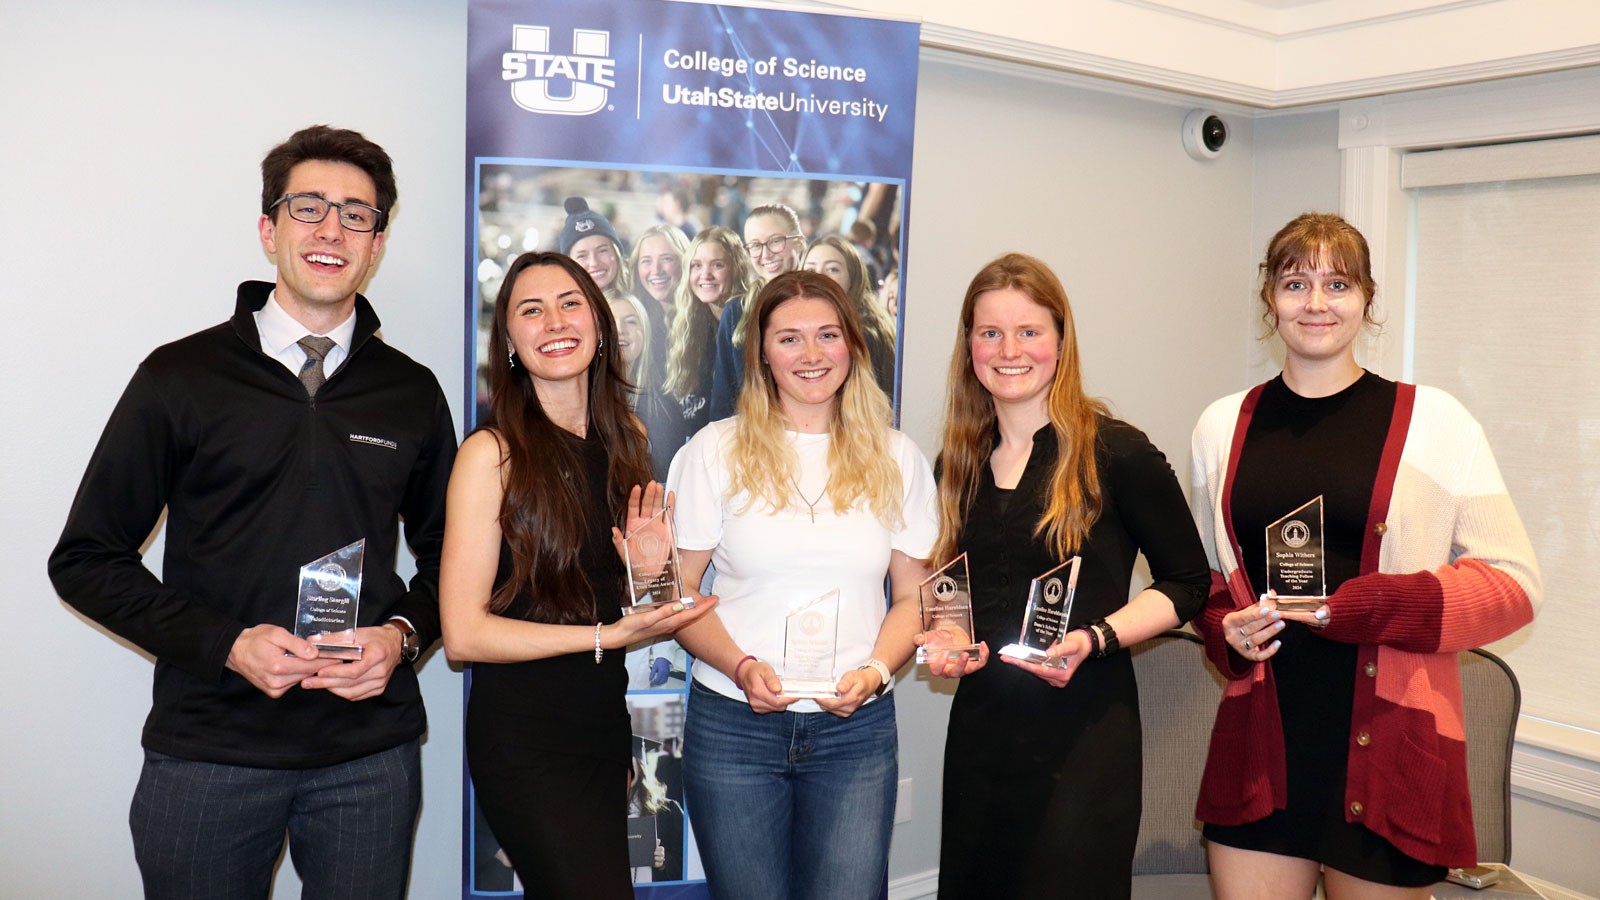 Among USU College of Science undergraduates honored at the college's annual awards ceremony April 25 were, from left, Sterling Sturgill, Bella Lonardo, Sydney Schmidt, Emeline Haroldsen and Sophia Withers.